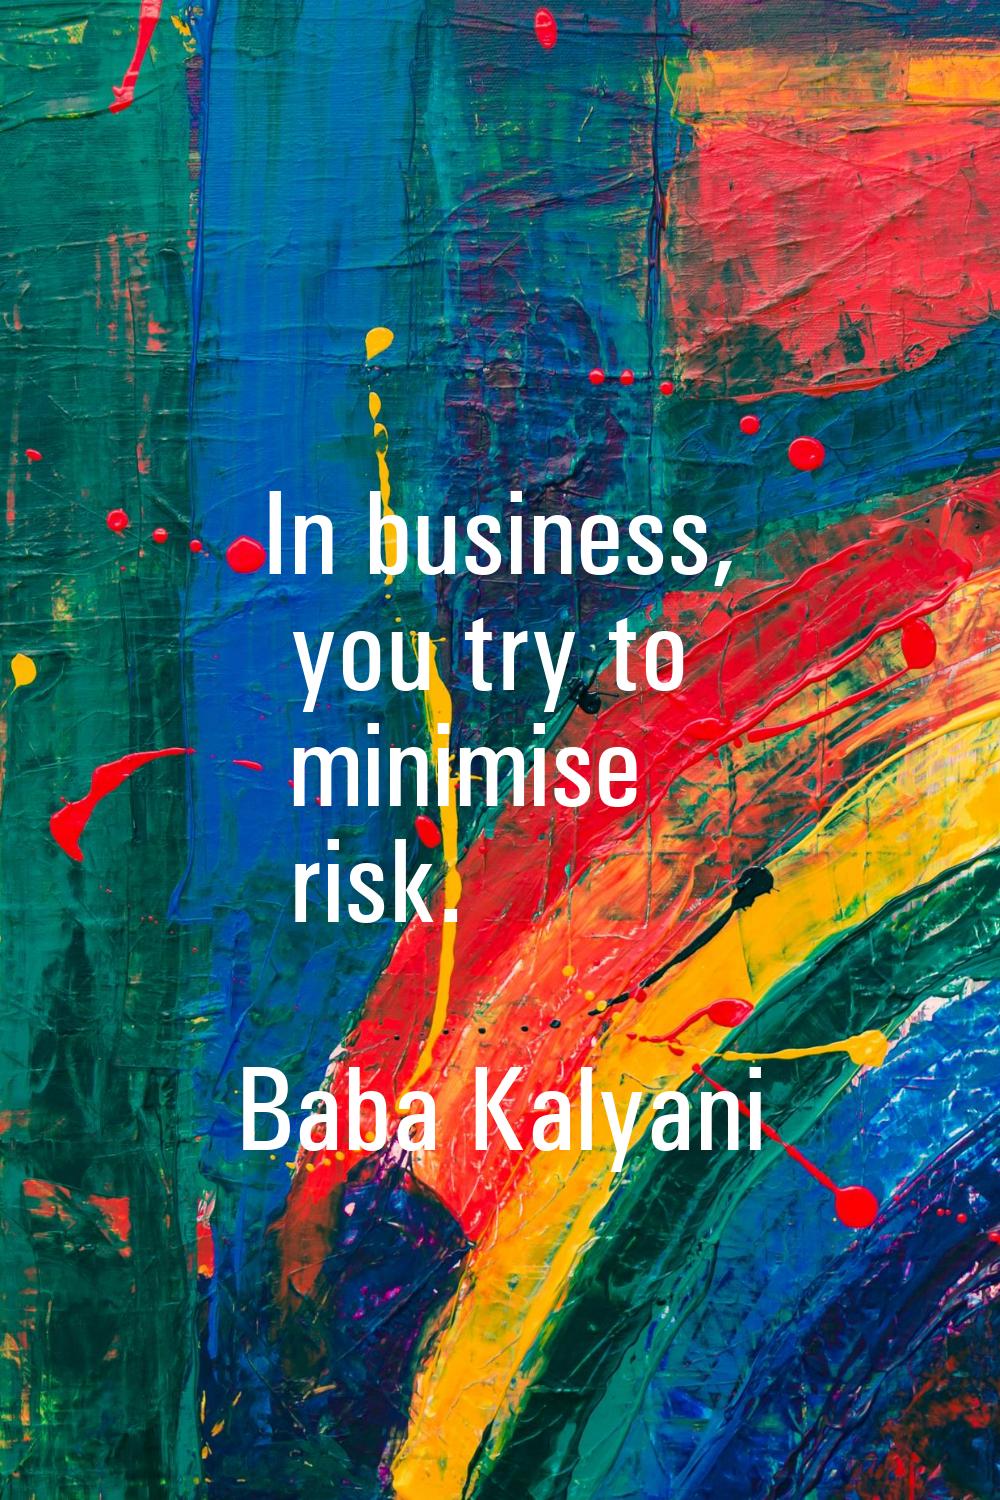 In business, you try to minimise risk.